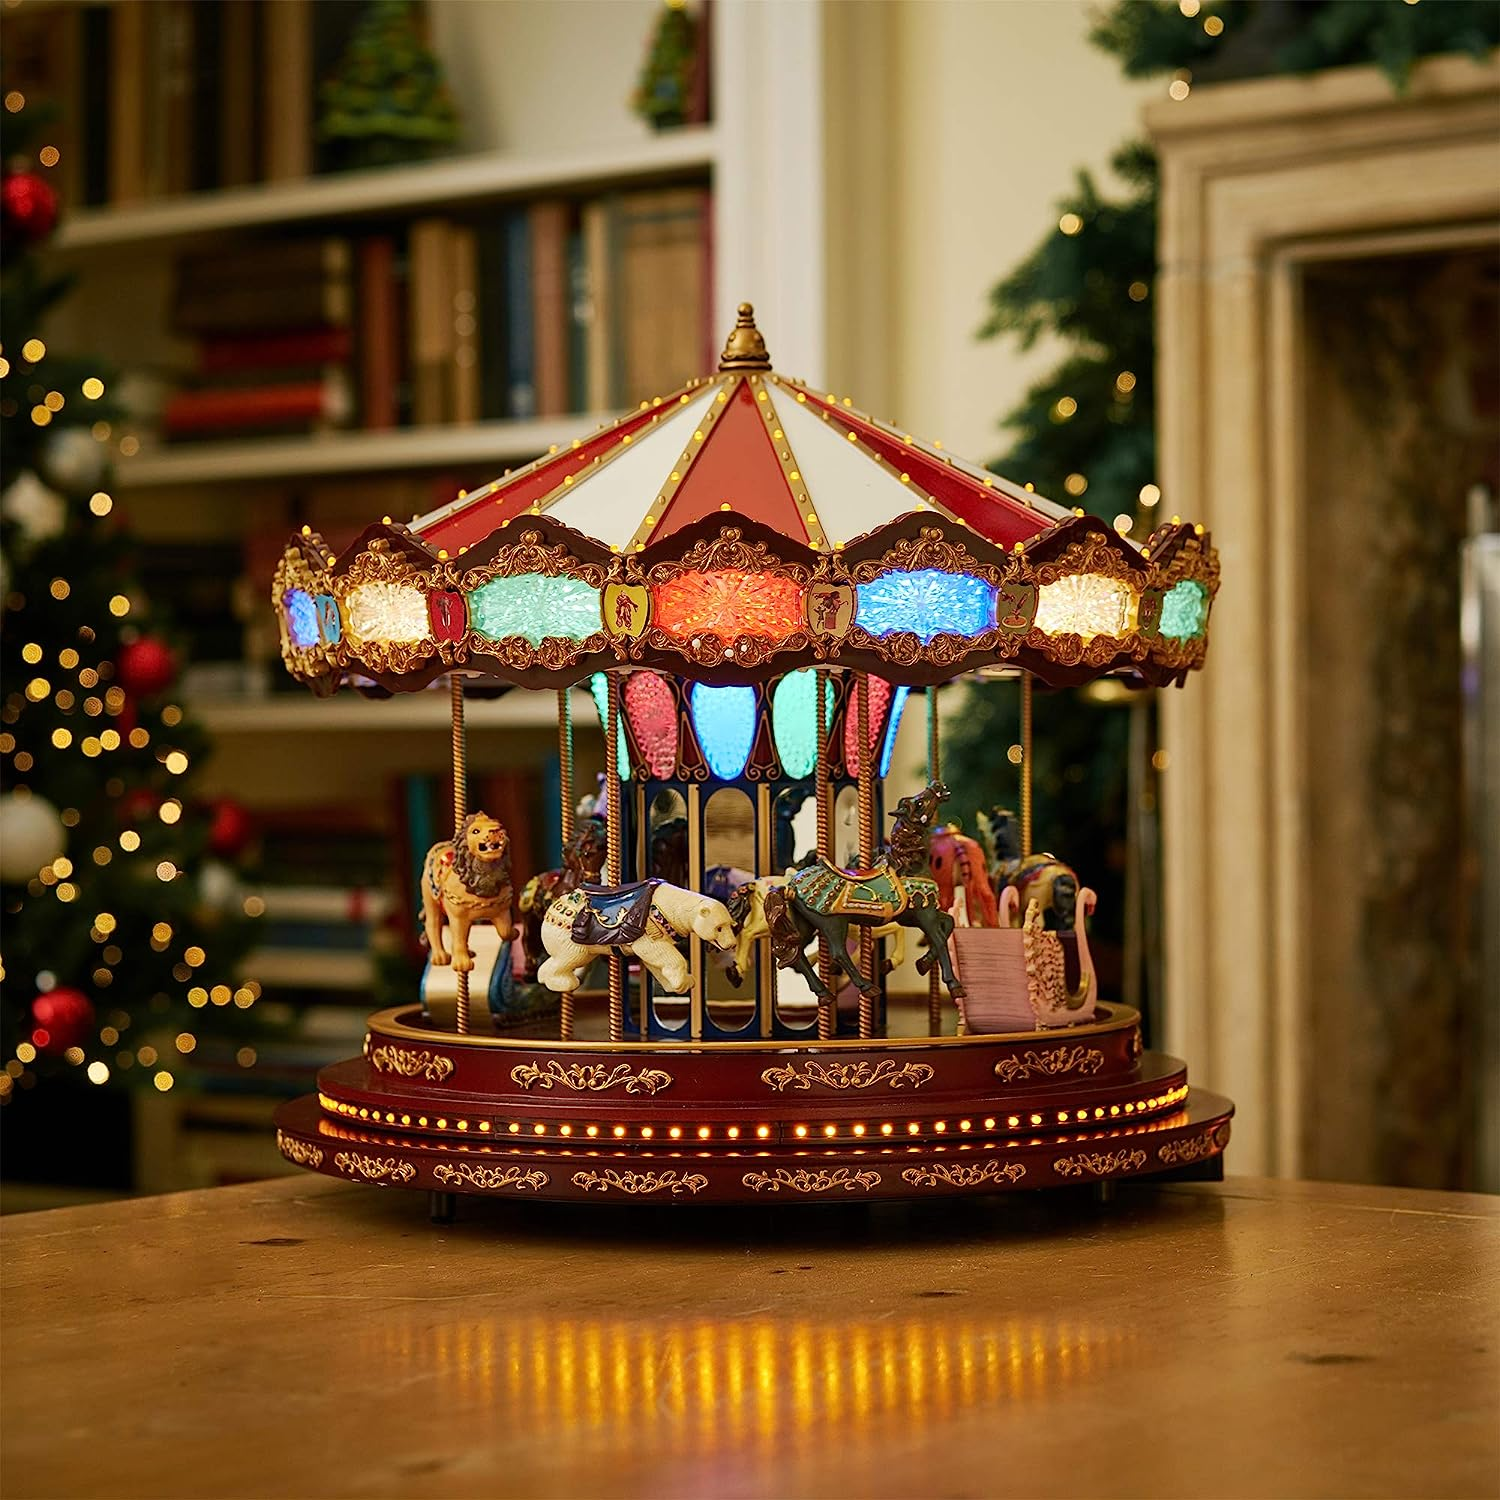 Marquee Deluxe Carousel Musical Animated Indoor Christmas Decoration